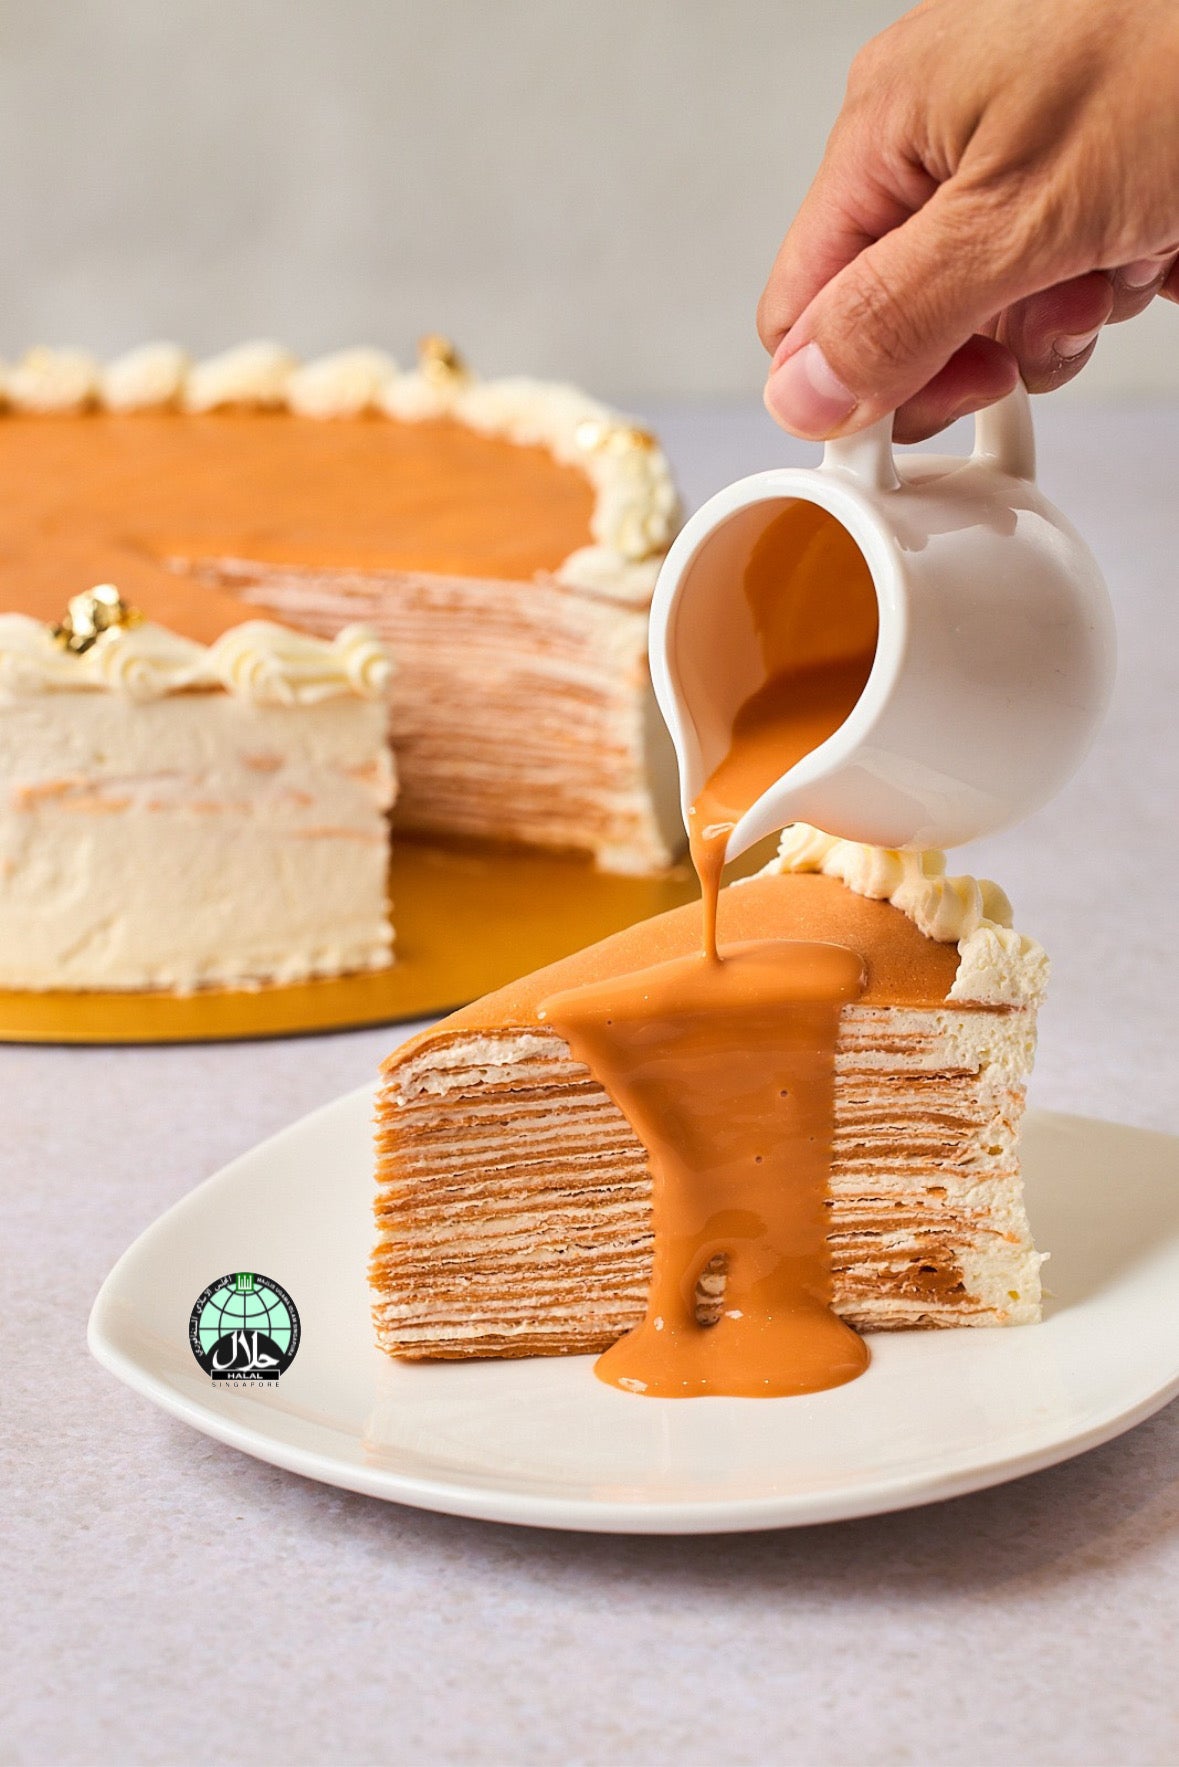 100% PURE Mao Shan Wang Durian Mille Crepe Cake (Best Seller 👑)